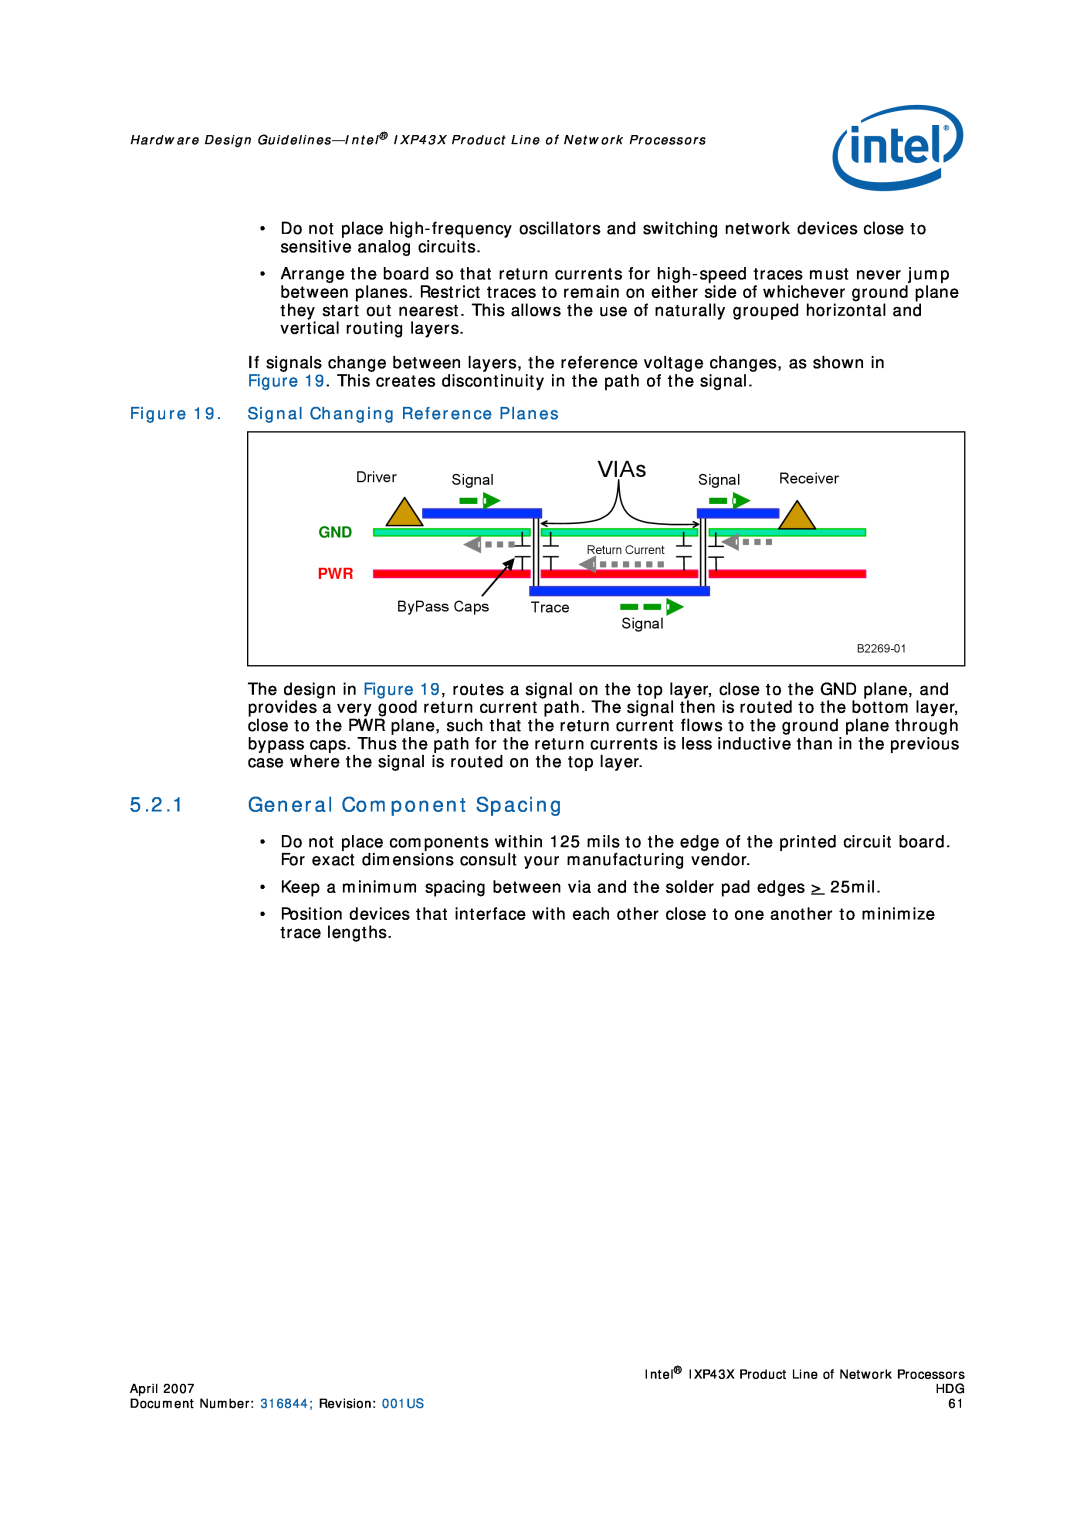 Intel IXP43X manual VIAs, General Component Spacing, Signal Changing Reference Planes 